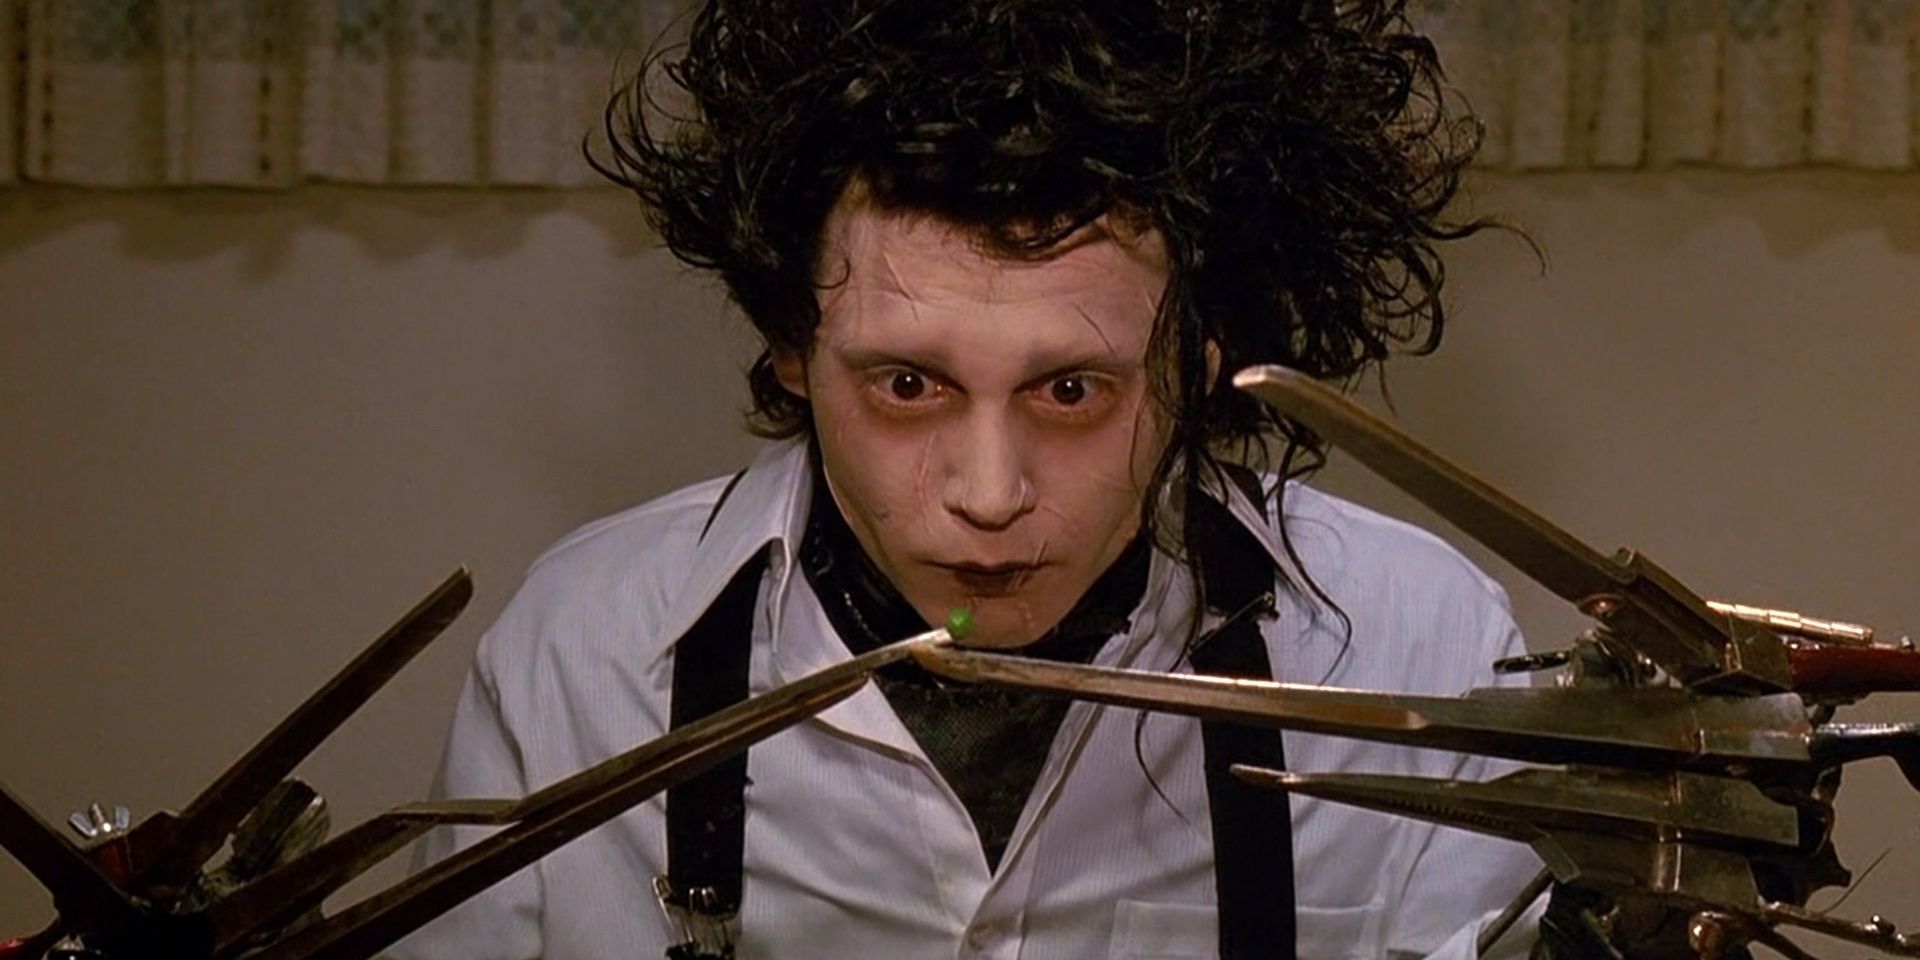 Johnny Depp as Edward Scissorhands trying to eat